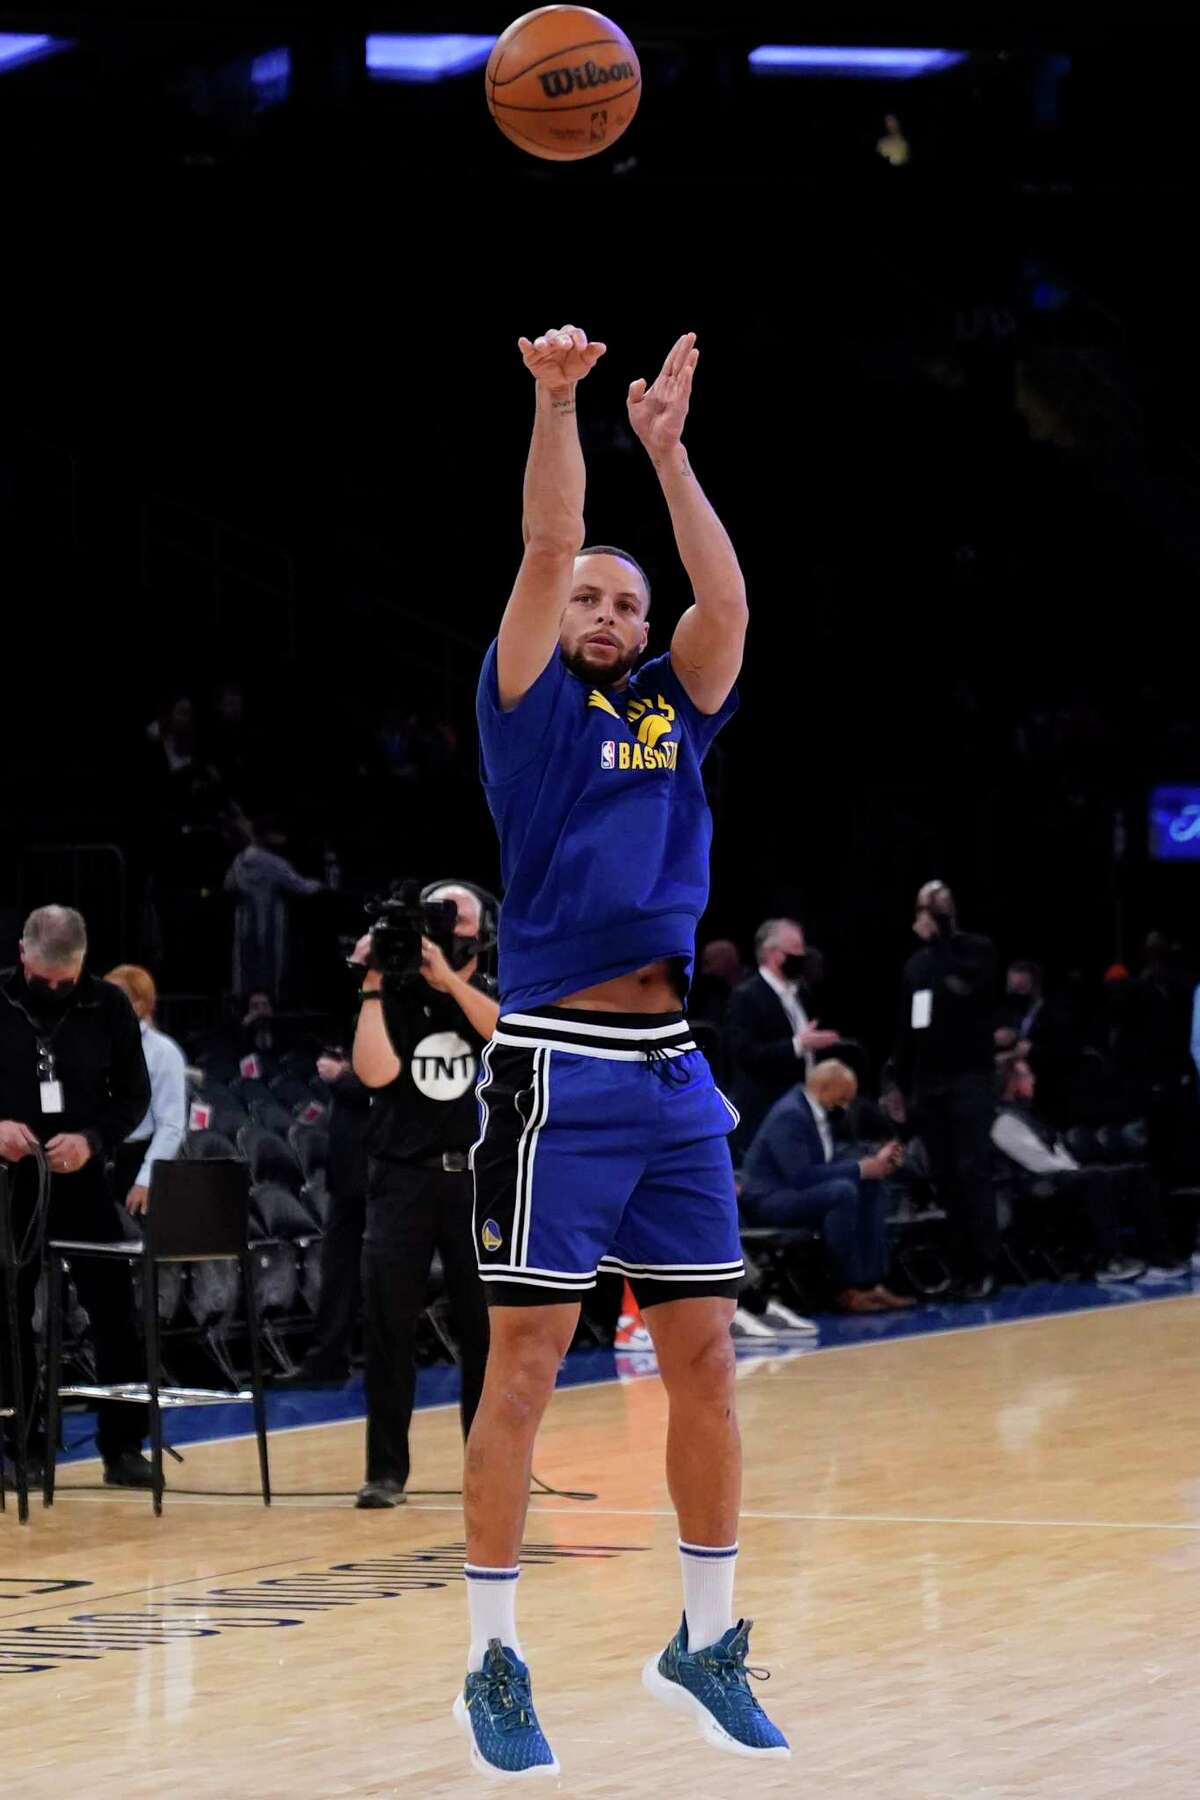 Golden State Warriors guard Stephen Curry warms up before an NBA basketball game against the New York Knicks, Tuesday, Dec. 14, 2021, at Madison Square Garden in New York.